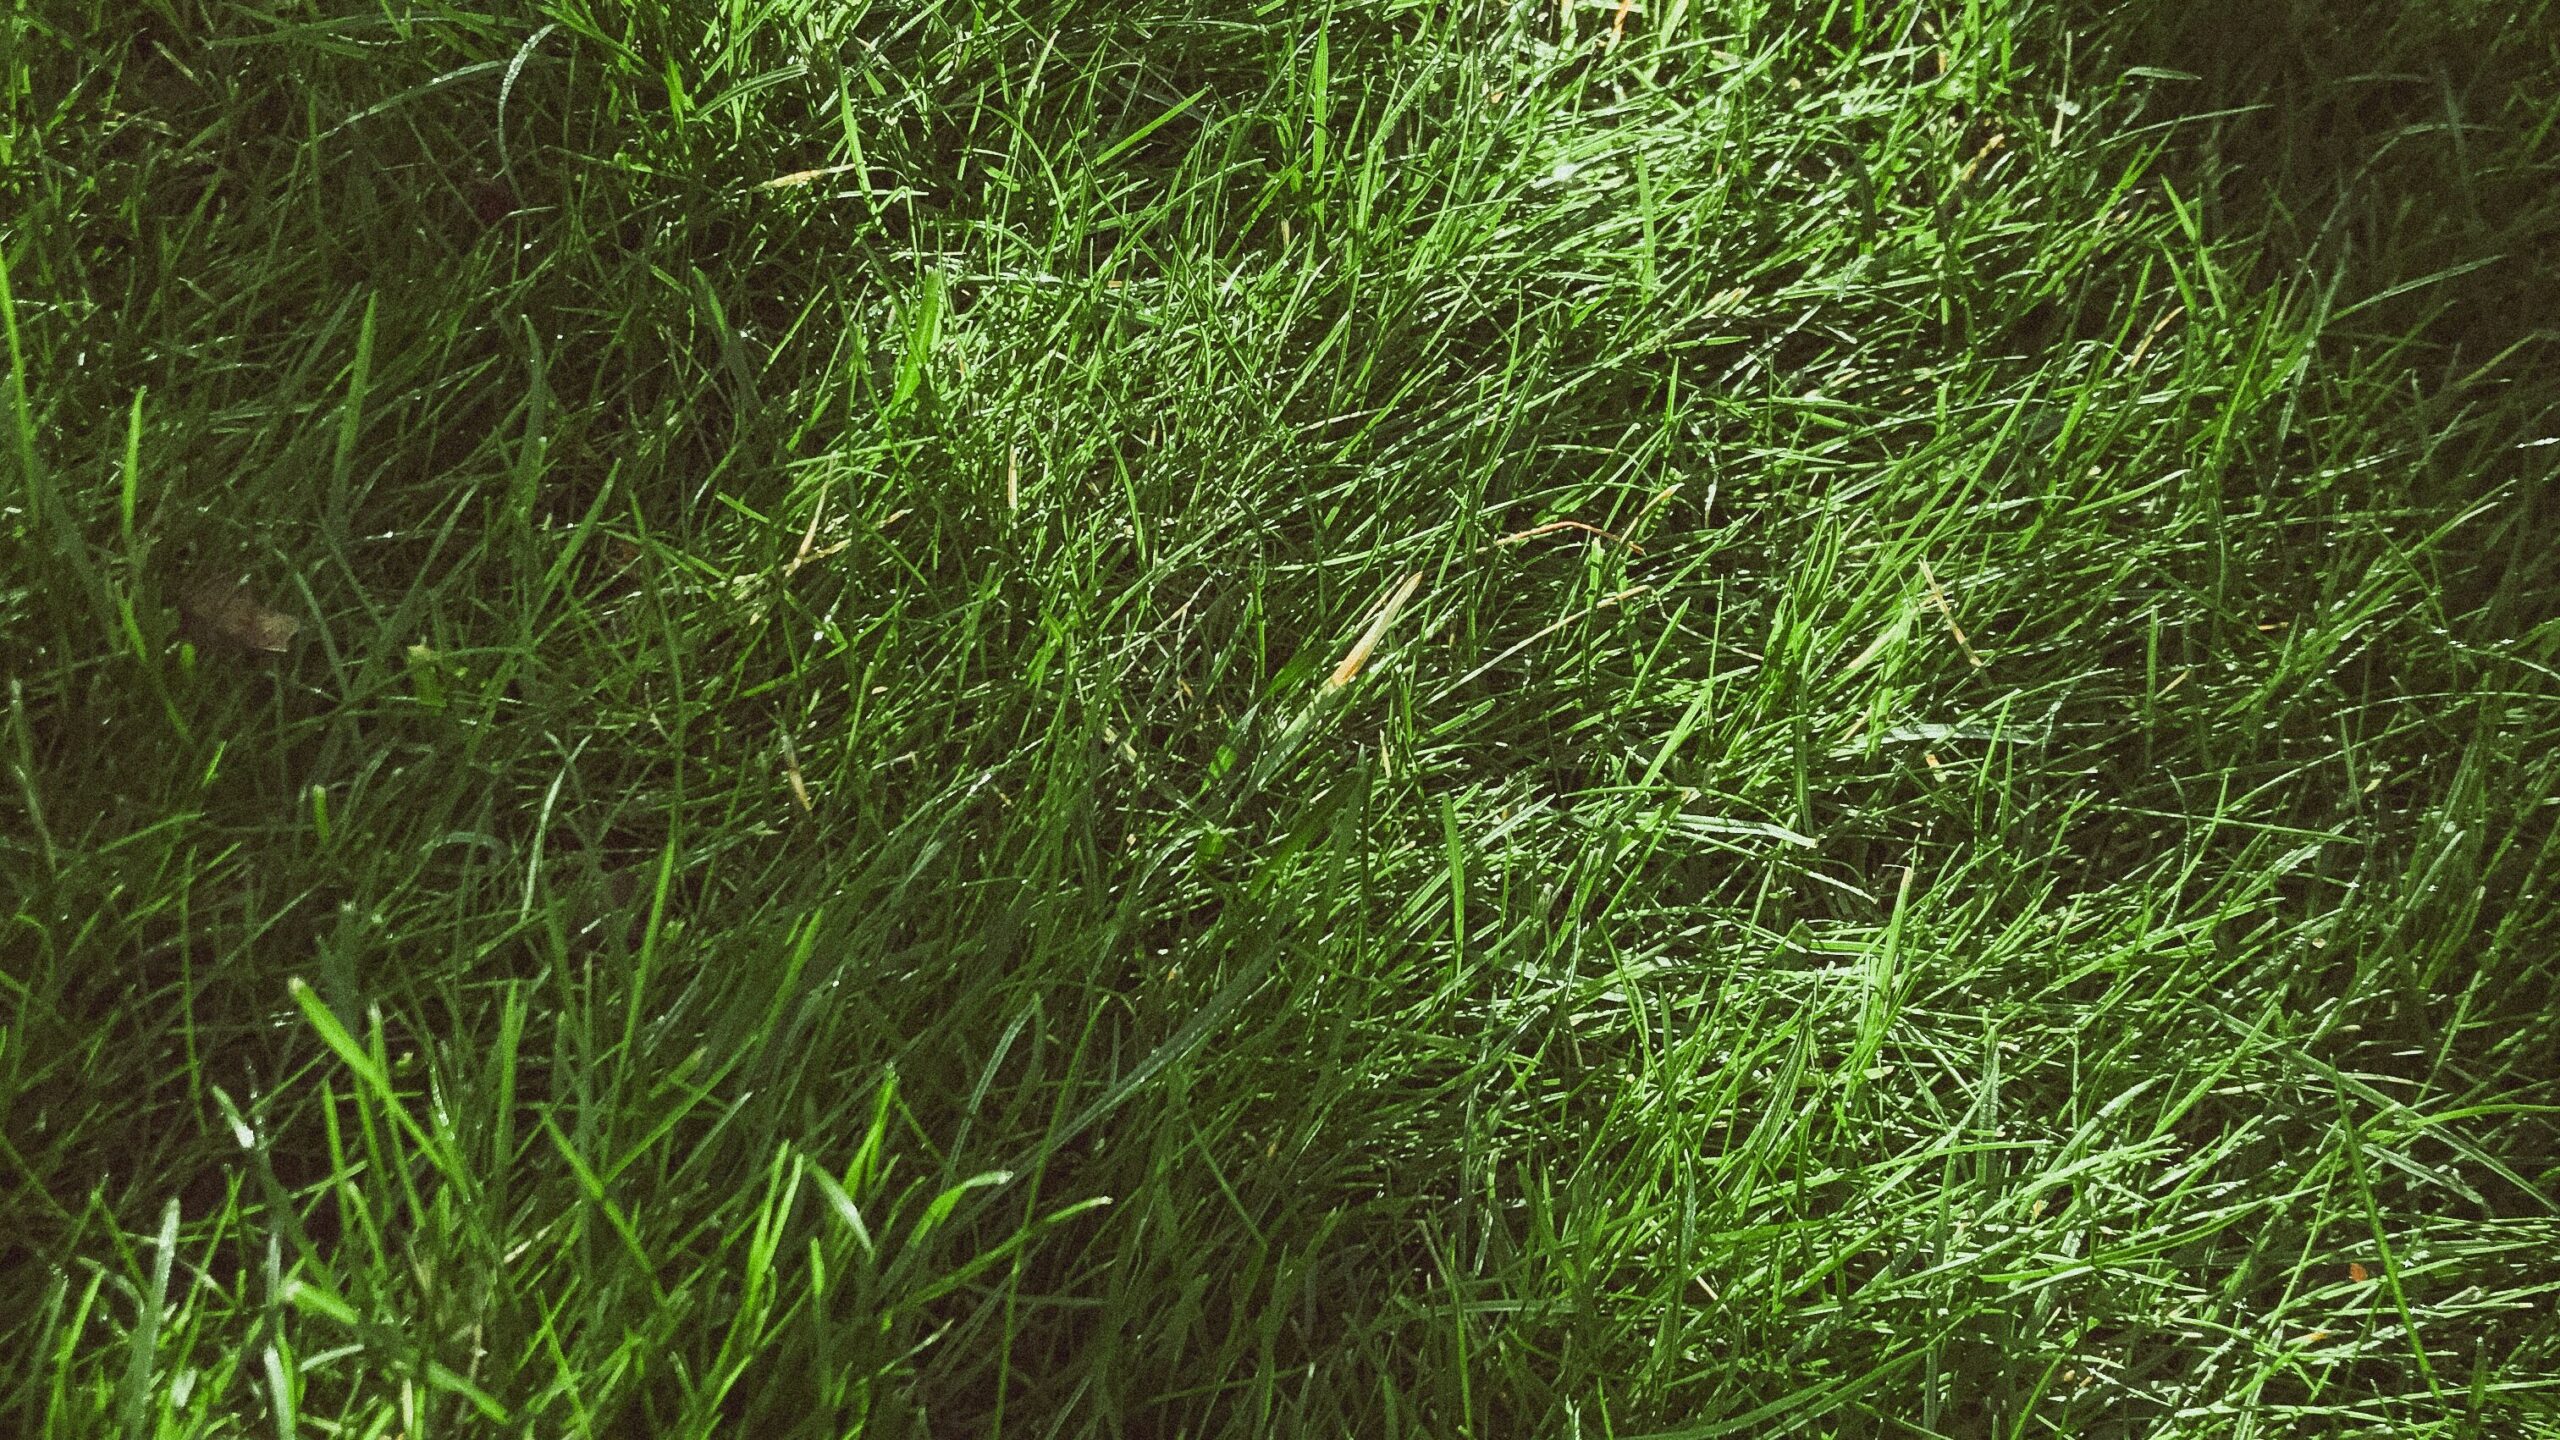 Lush green grass texture, representing the potential for revival when addressing dead grass in a lawn.